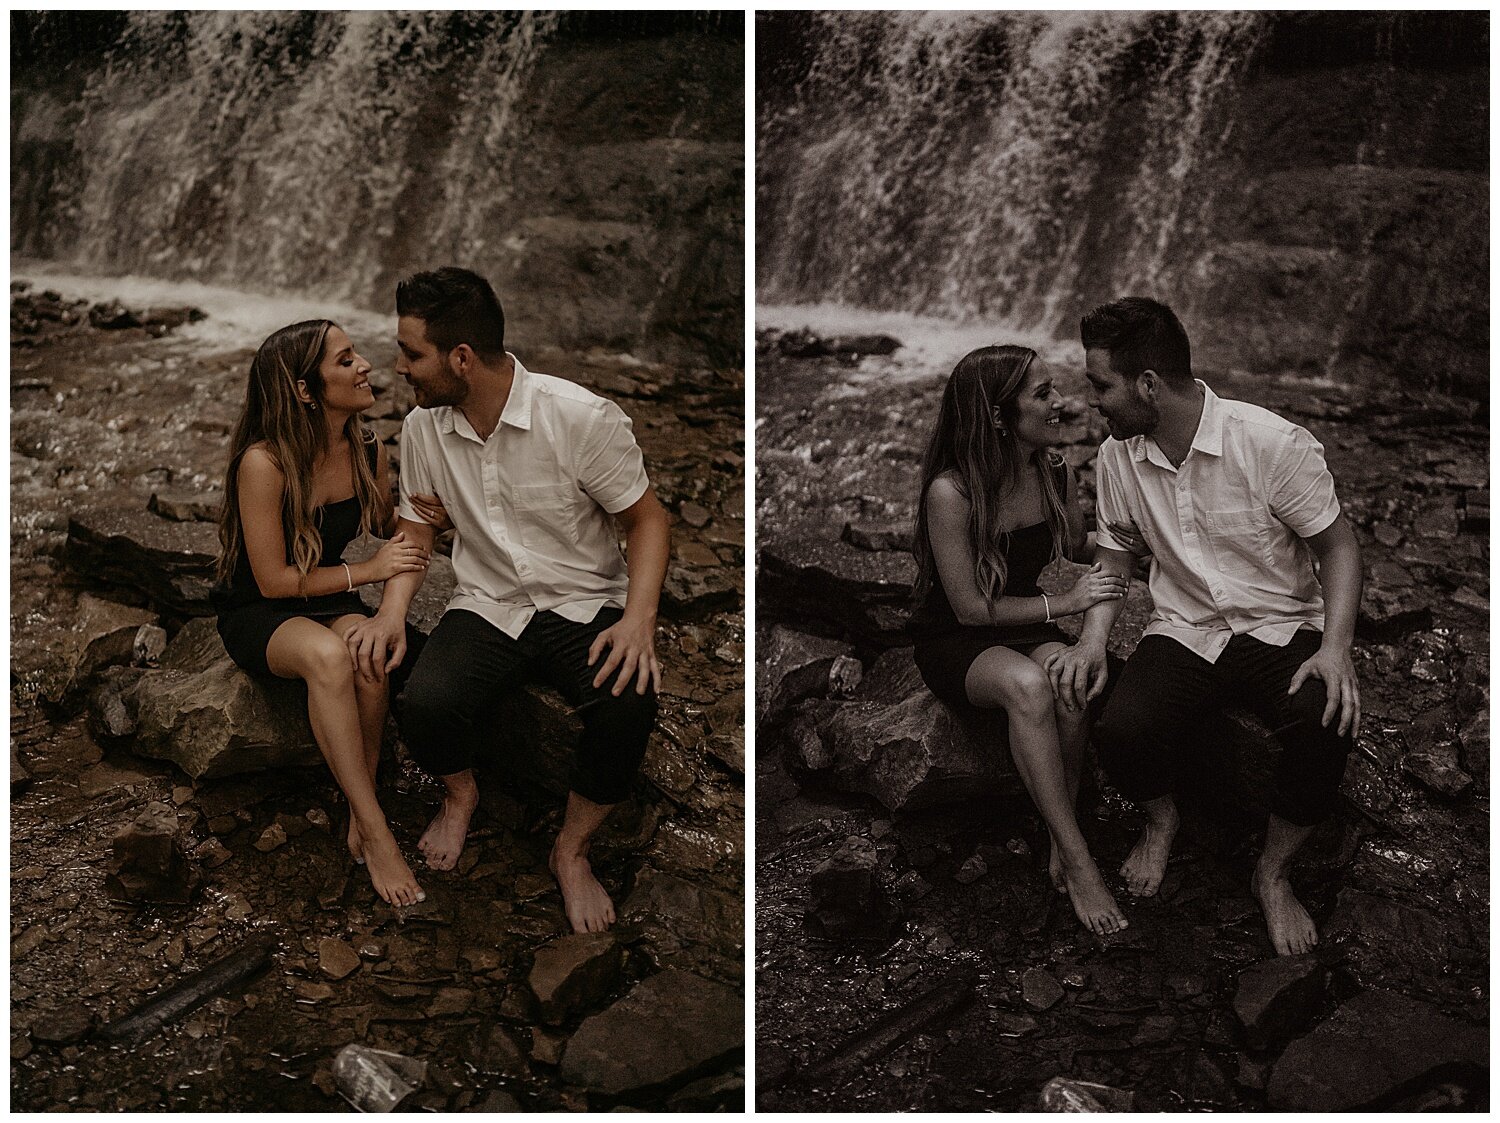 Cotton_Factory_And_Waterfall_Engagement_Session_Hamilton_Ontario_Wedding_Photographer_0120.jpg